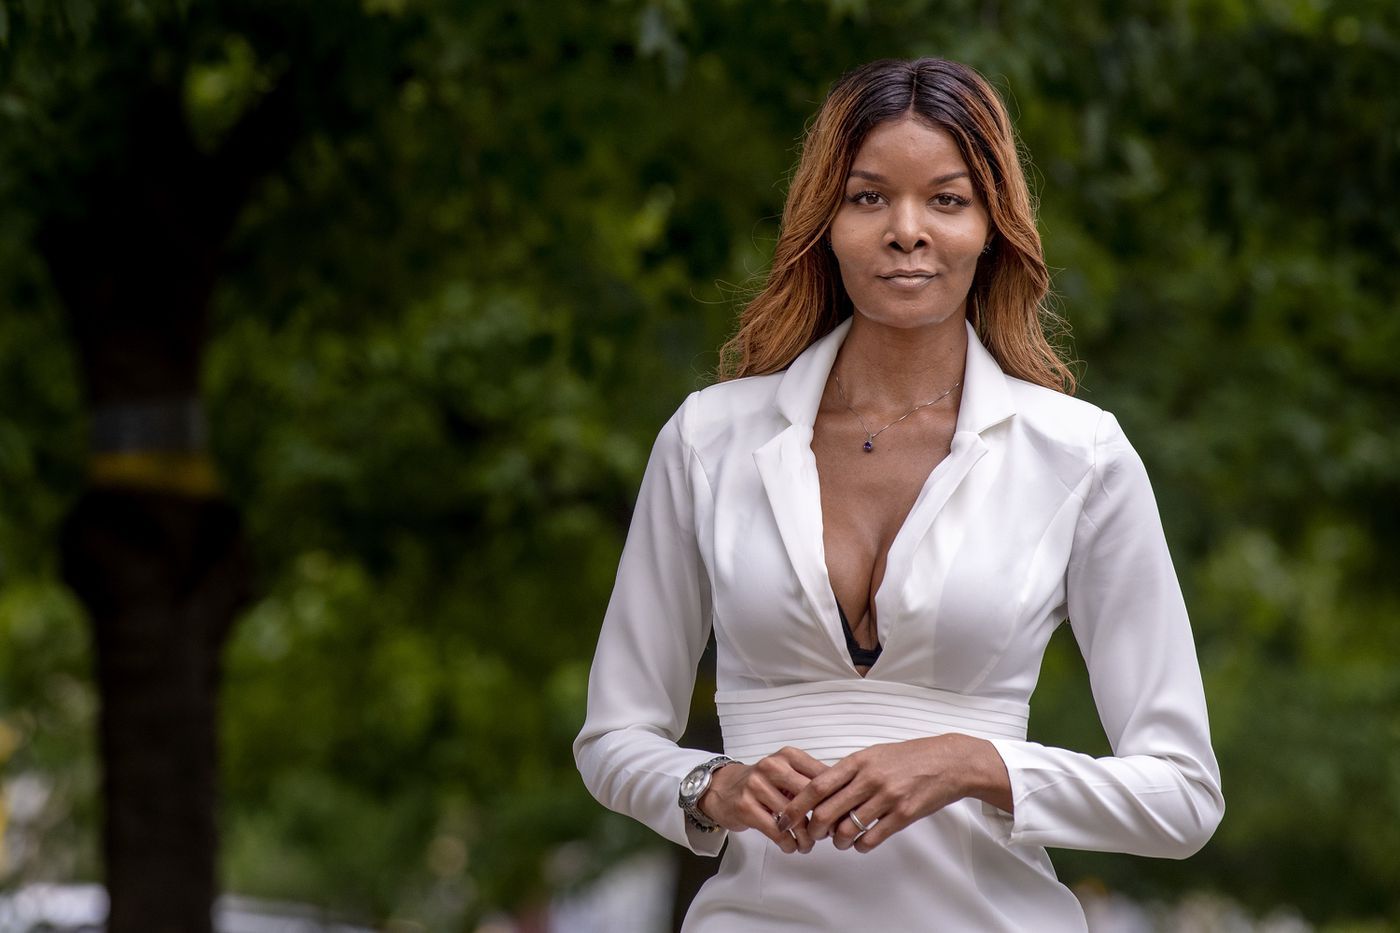 Sharron Cooks, the owner & CEO of Making Our Lives Easier, a consulting firm that advocates for marginalized communities poses in Cedar Park in West Philadelphia June 25, 2020. Image by Tom Gralish. United States, 2020.